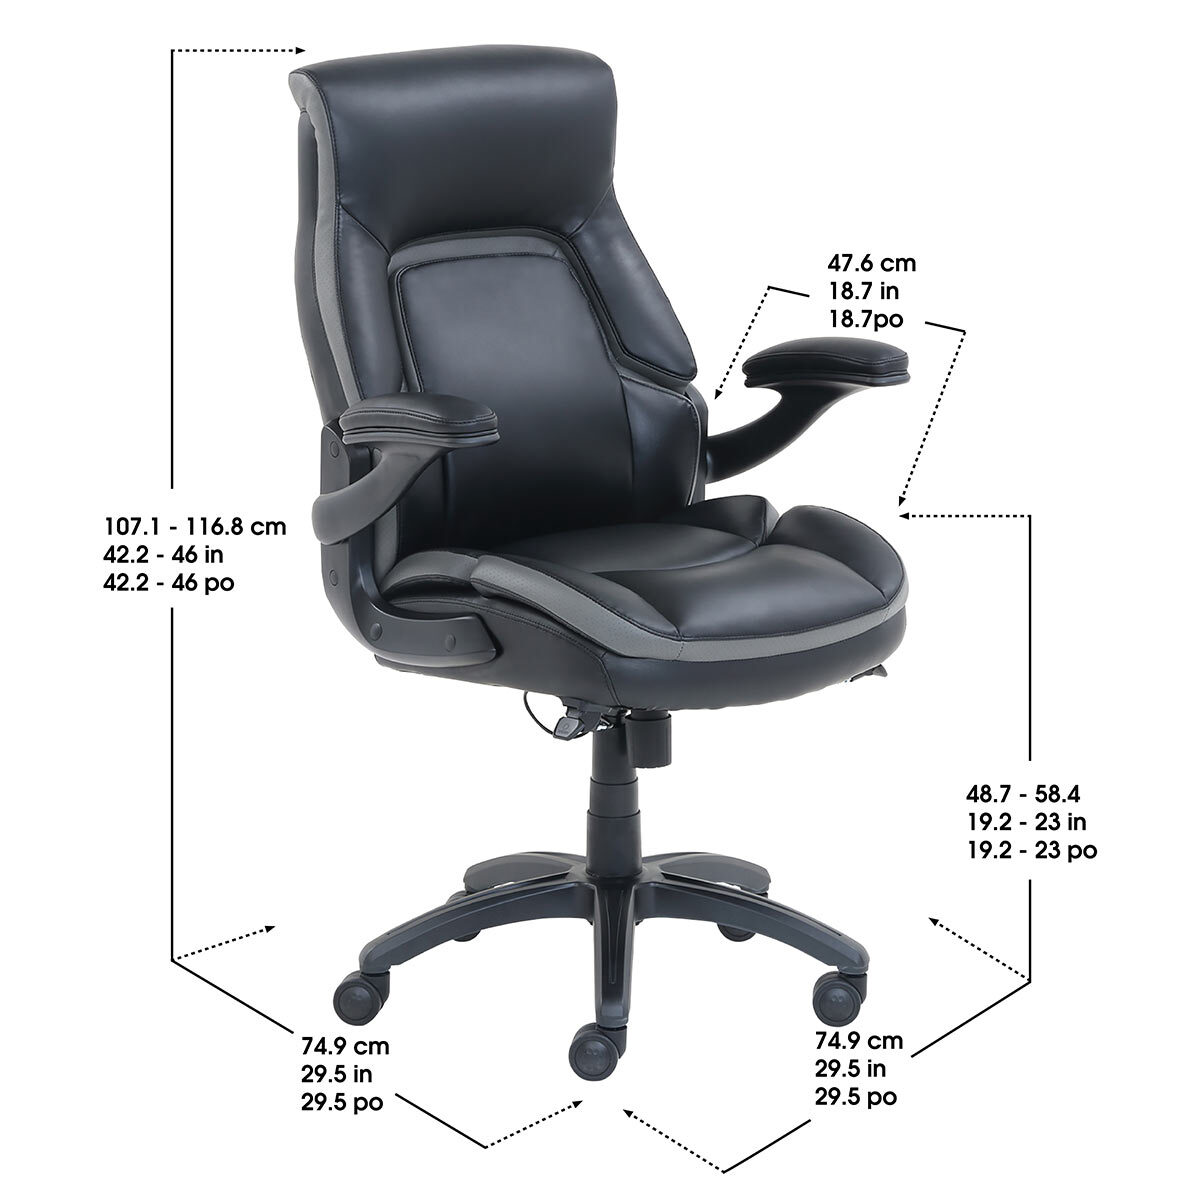 Line drawing of True Innovations Dormeo Manager's Office Chair